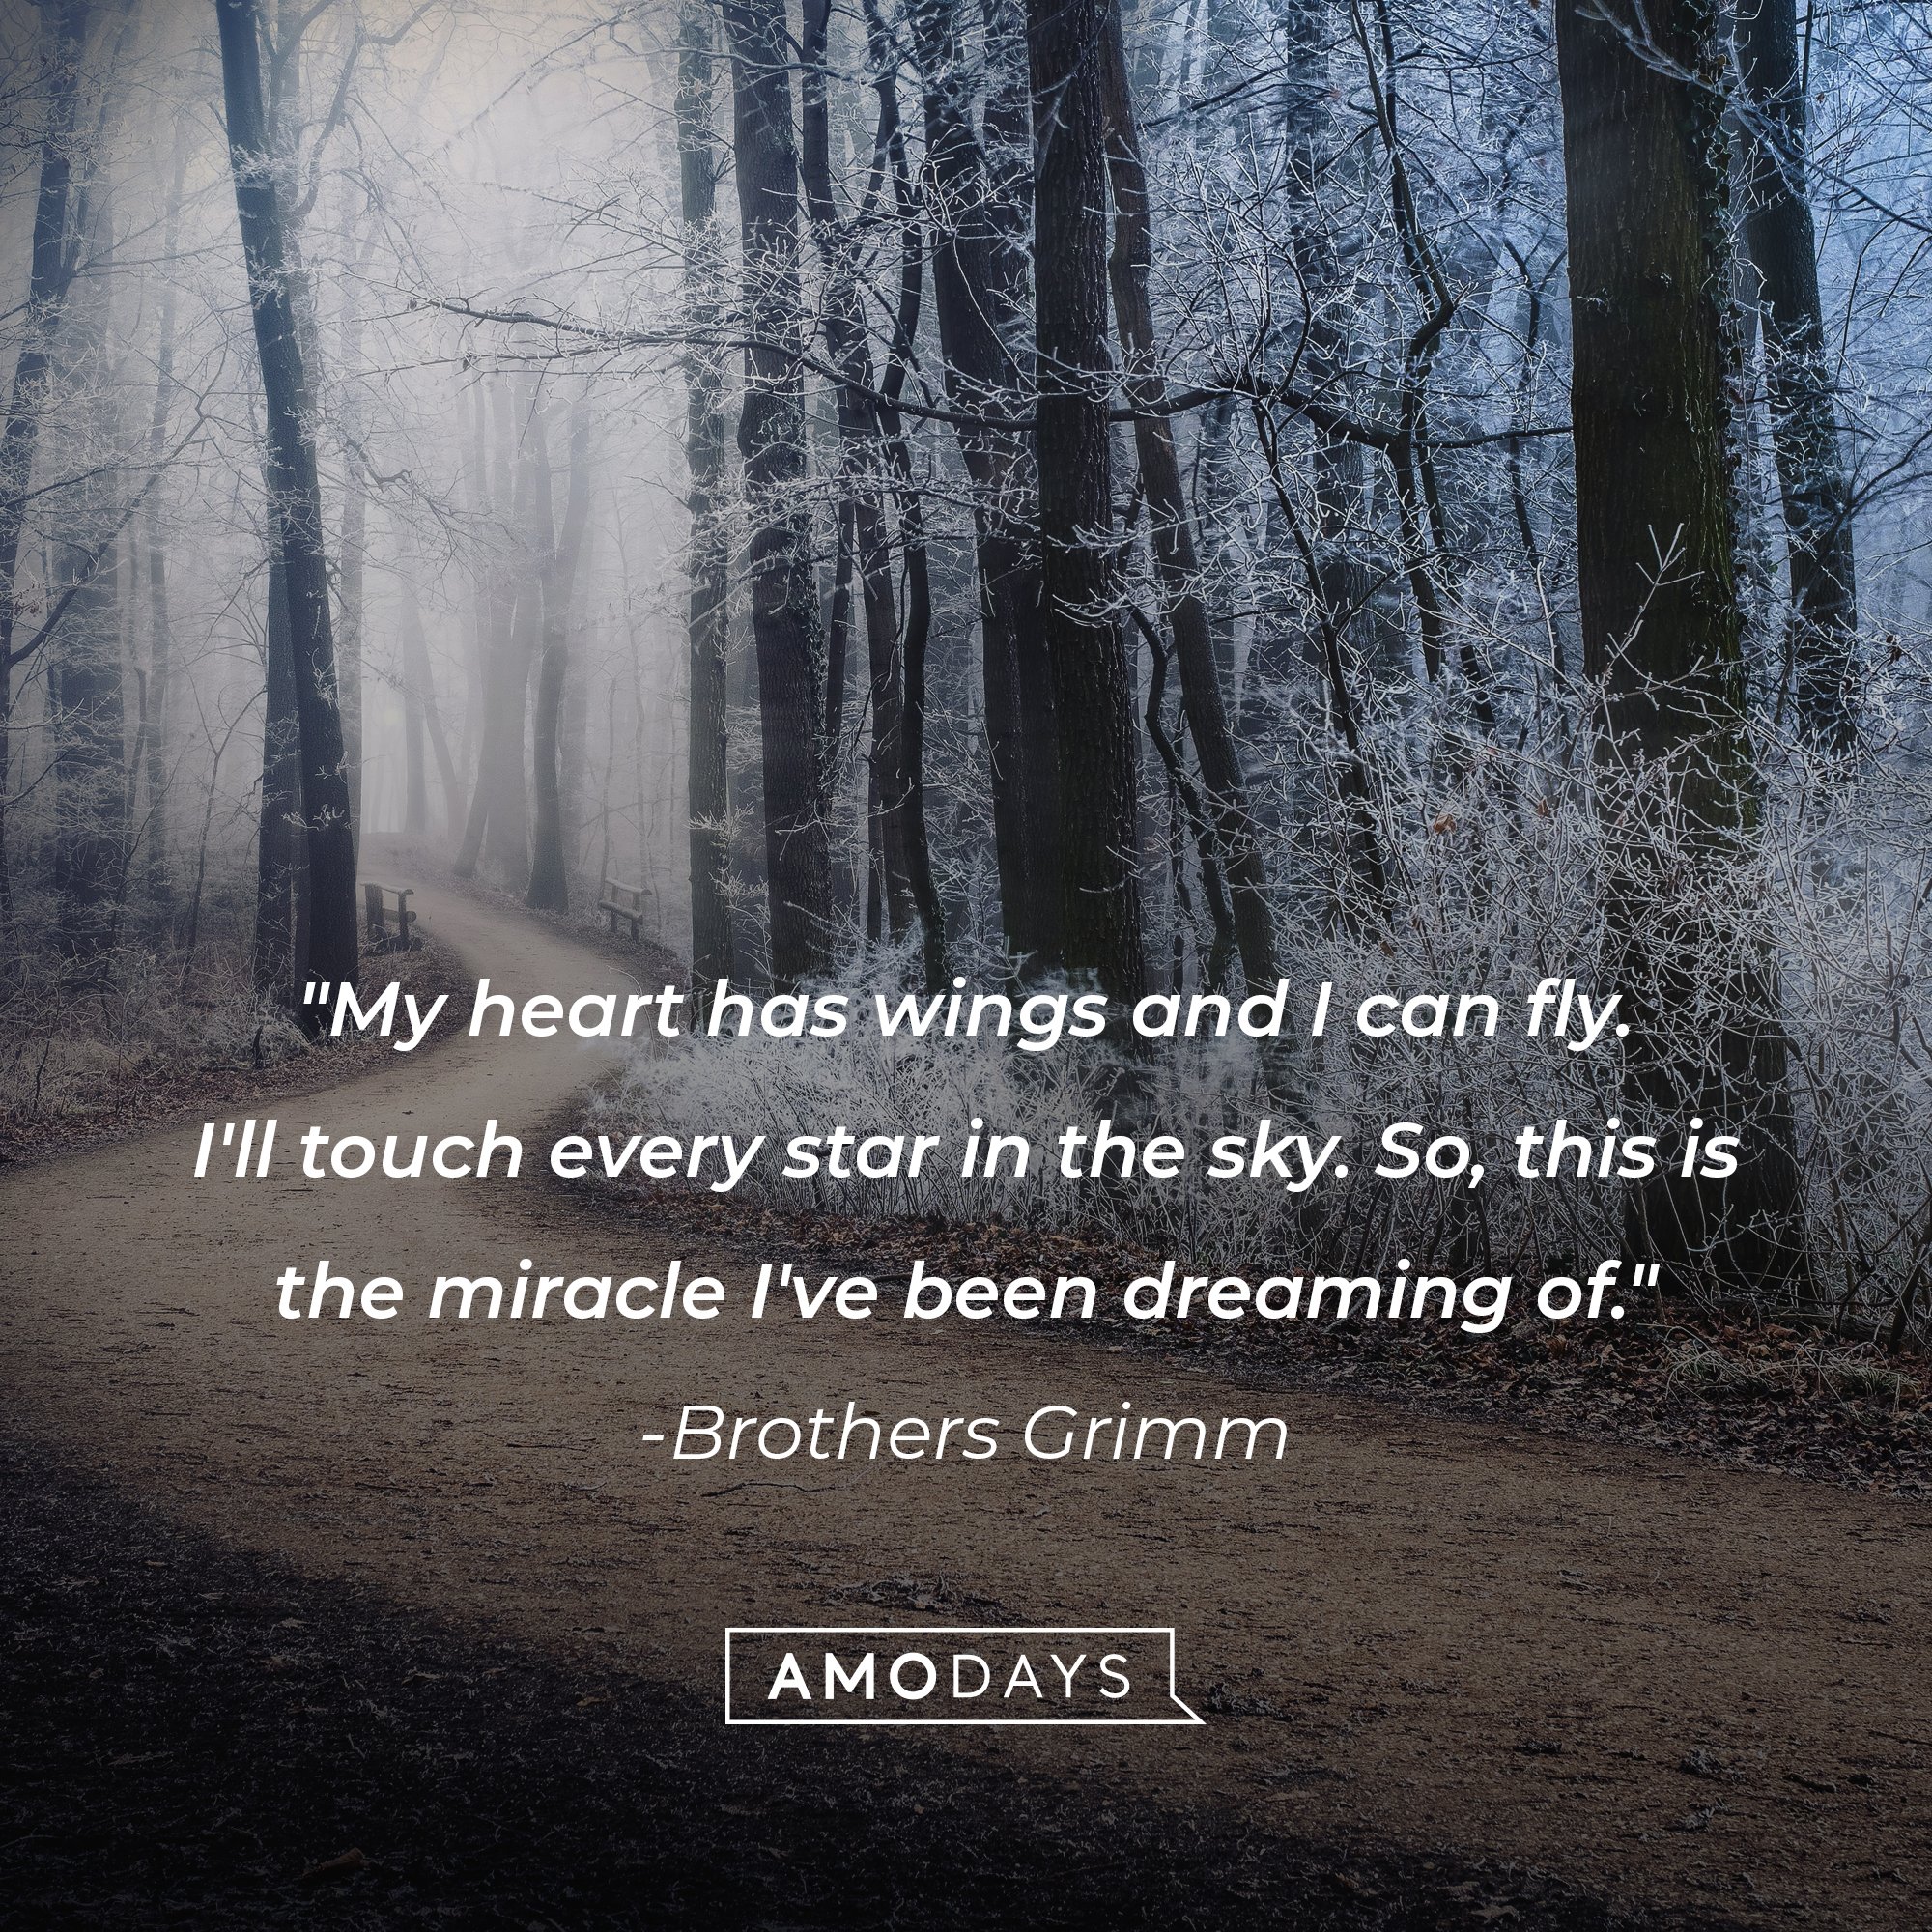 Brothers Grimm's quote: "My heart has wings and I can fly. I'll touch every star in the sky. So, this is the miracle I've been dreaming of." | Image: Amo Days